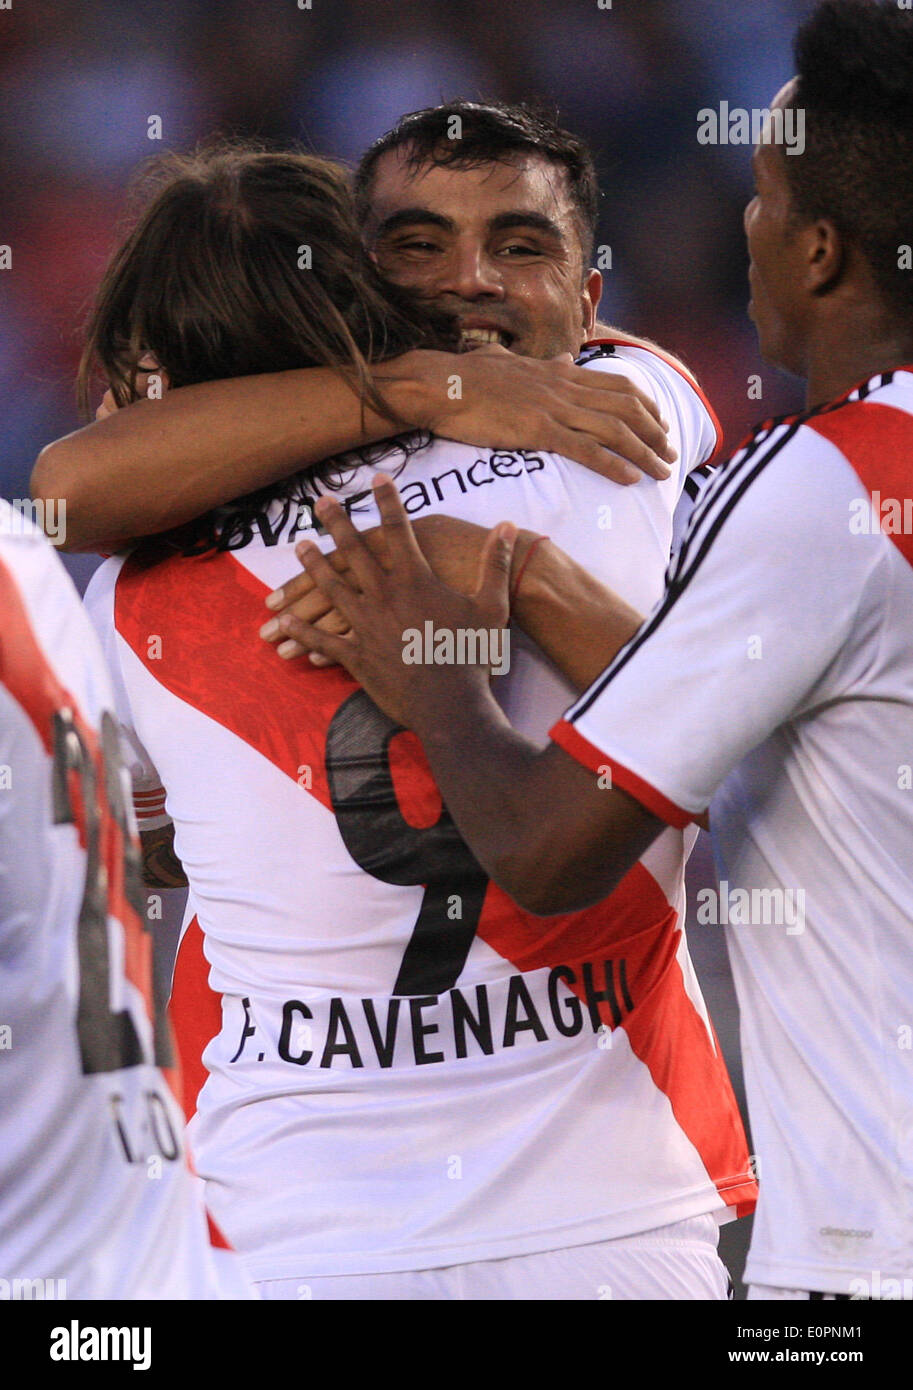 (140519) -- BUENOS AIRES, May 19, 2014 (Xinhua) -- Gabriel Mercado (Rear) of River Plate celebrates a scoring with his teammate Fernando Cavenaghi after the Argentine First Division football match against Quilmes in Buenos Aires, capital of Argentina, on May 18, 2014. River Plate defeated Quilmes by 5-0 and won the tournament. (Xinhua/Martin Zabala) (jp) (ah) Stock Photo